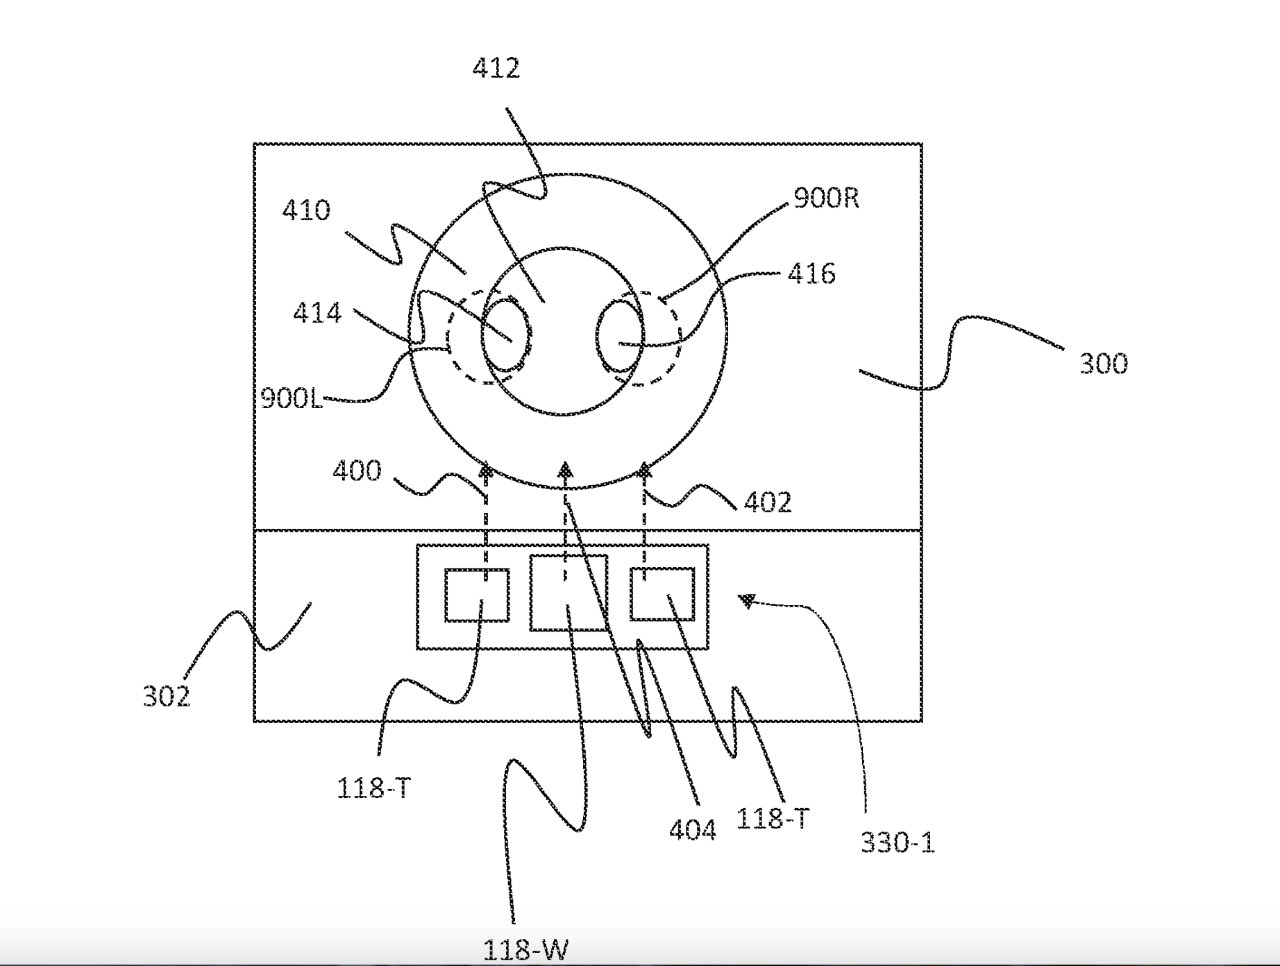 Honestly, it's a diagram of a headrest speaker system